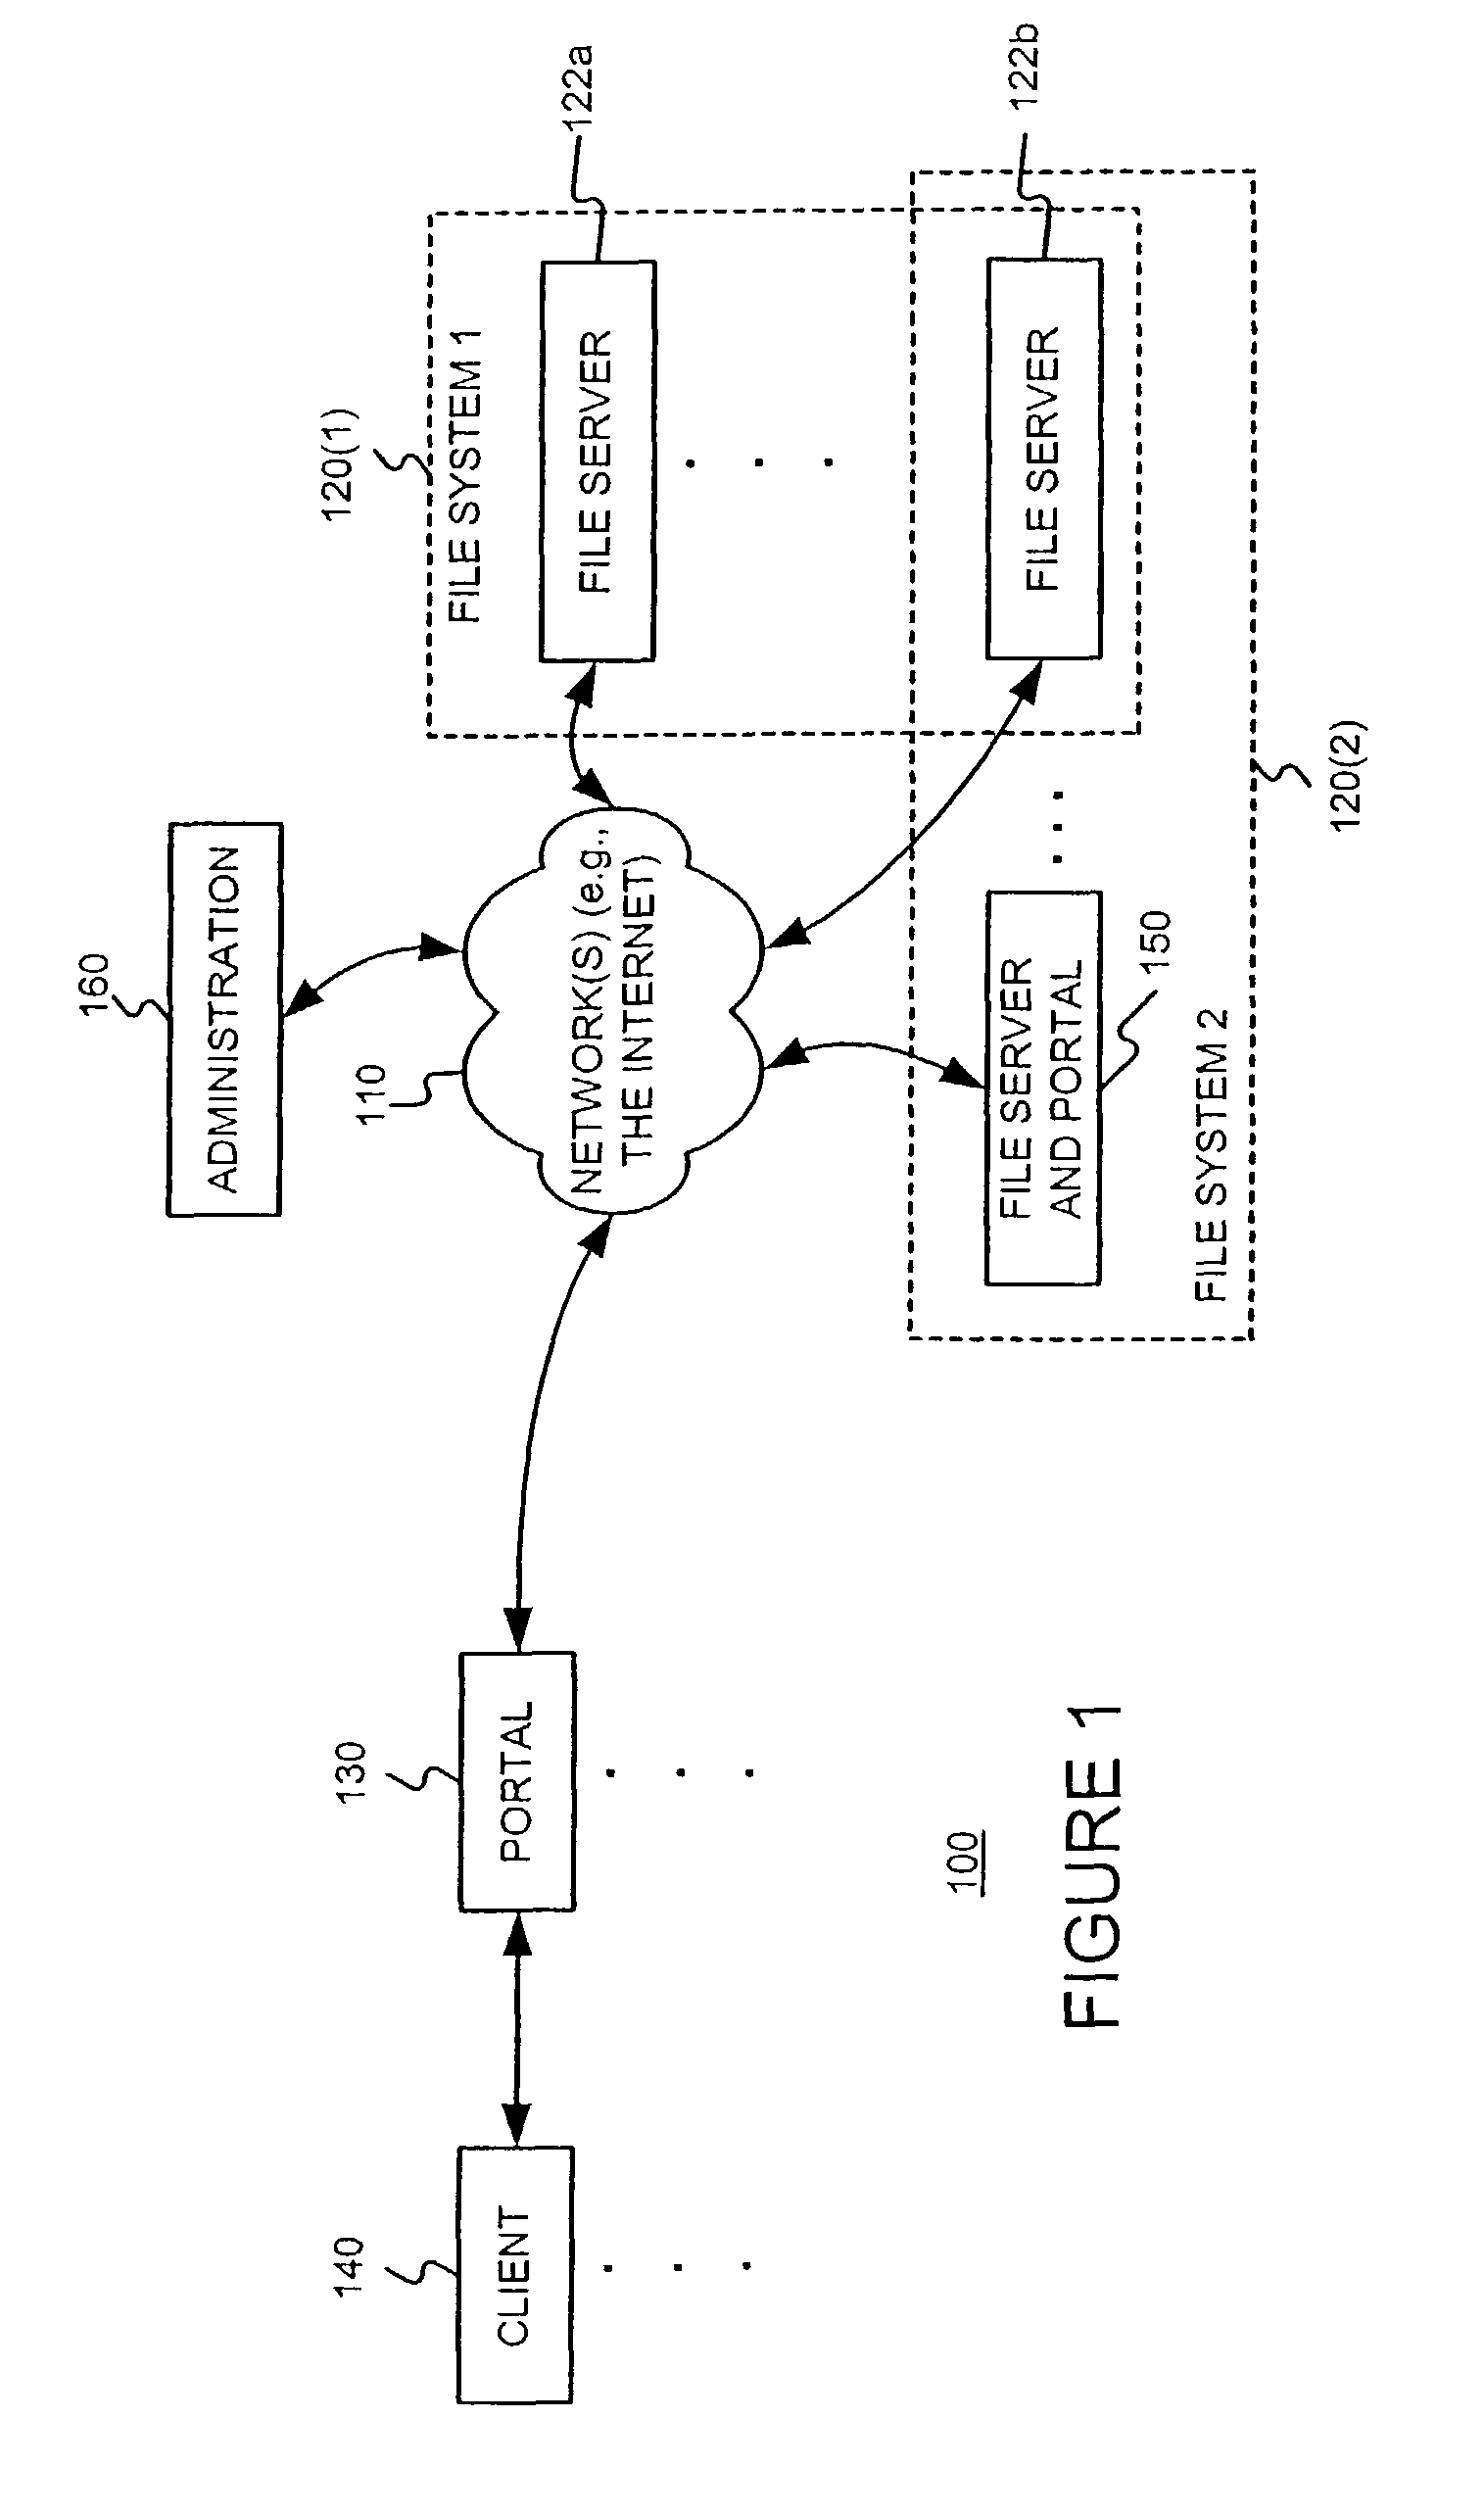 Independent data access in a segmented file system